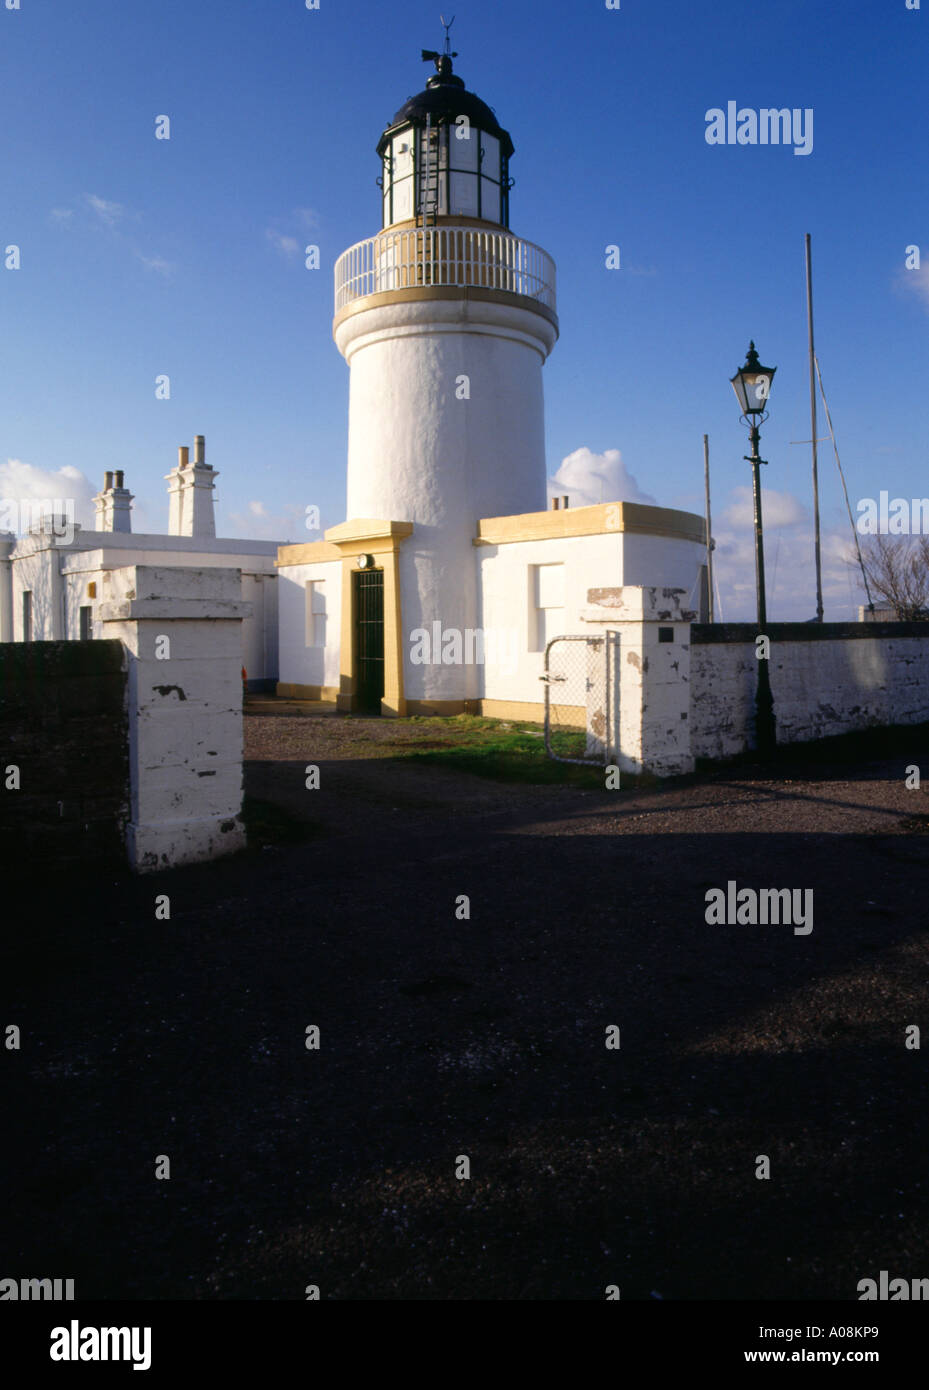 dh Lighthouse CROMARTY ROSS CROMARTY Lighthouse for Cromarty Firth in town light house Stock Photo